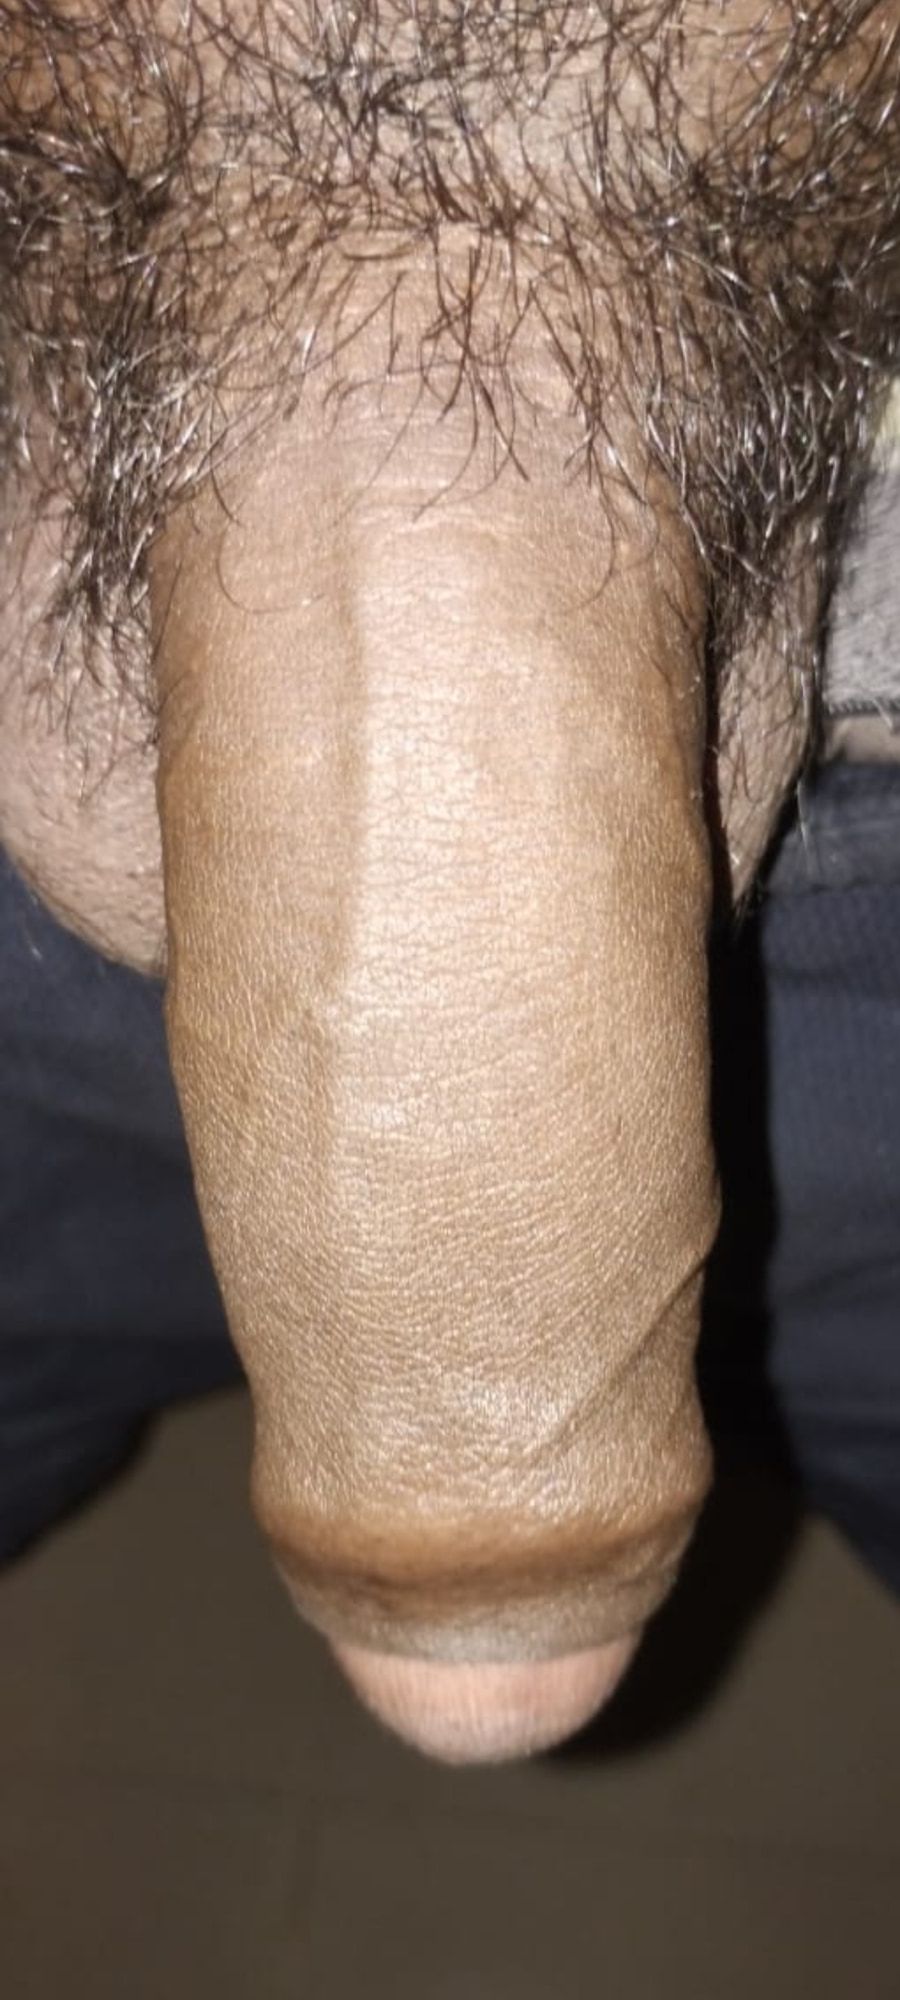 My cock waiting for vagina 